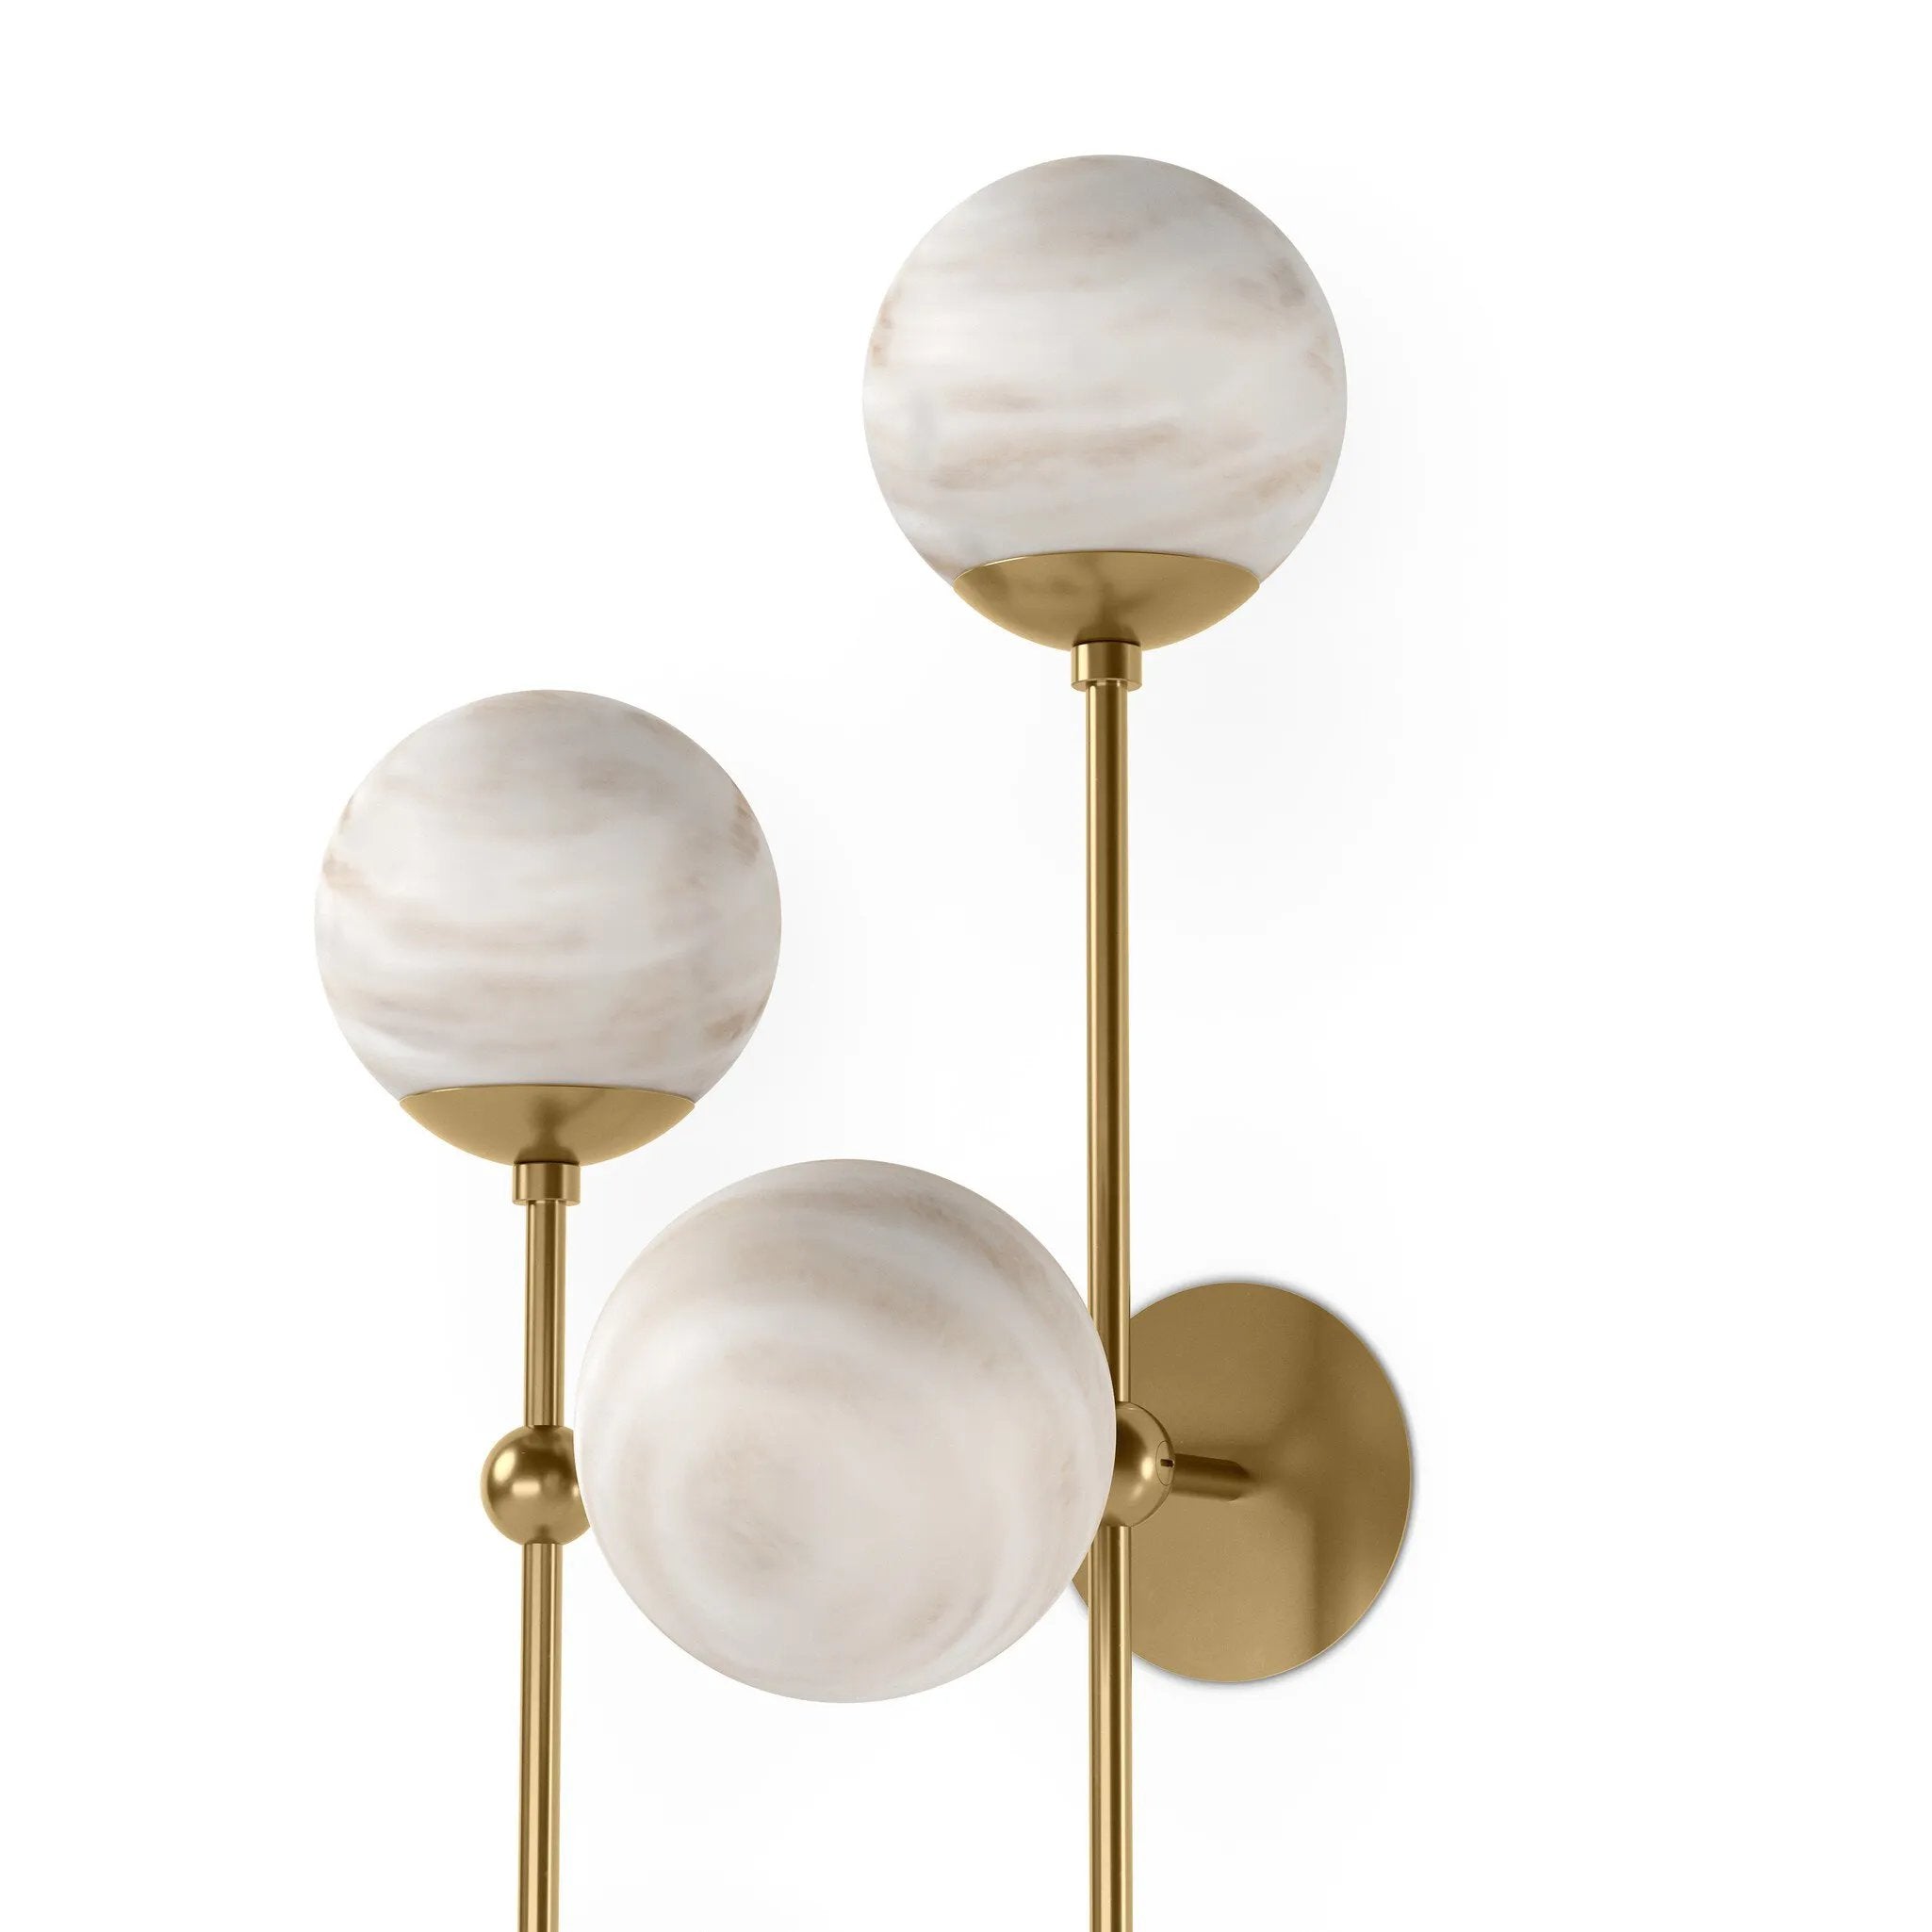 Marbled glass spheres seem to extend and reach across smooth brass rods. Each globe is individually blown, shaped and sculpted by hand through a one-hour process. Brass and glass are 98% recyclable. Designed and sustainably made in Poland by Schwung.Overall Dimensions13.75"w x 13.00"d x 36.25"hFull Details &amp; SpecificationsTear Shee Amethyst Home provides interior design, new home construction design consulting, vintage area rugs, and lighting in the Salt Lake City metro area.